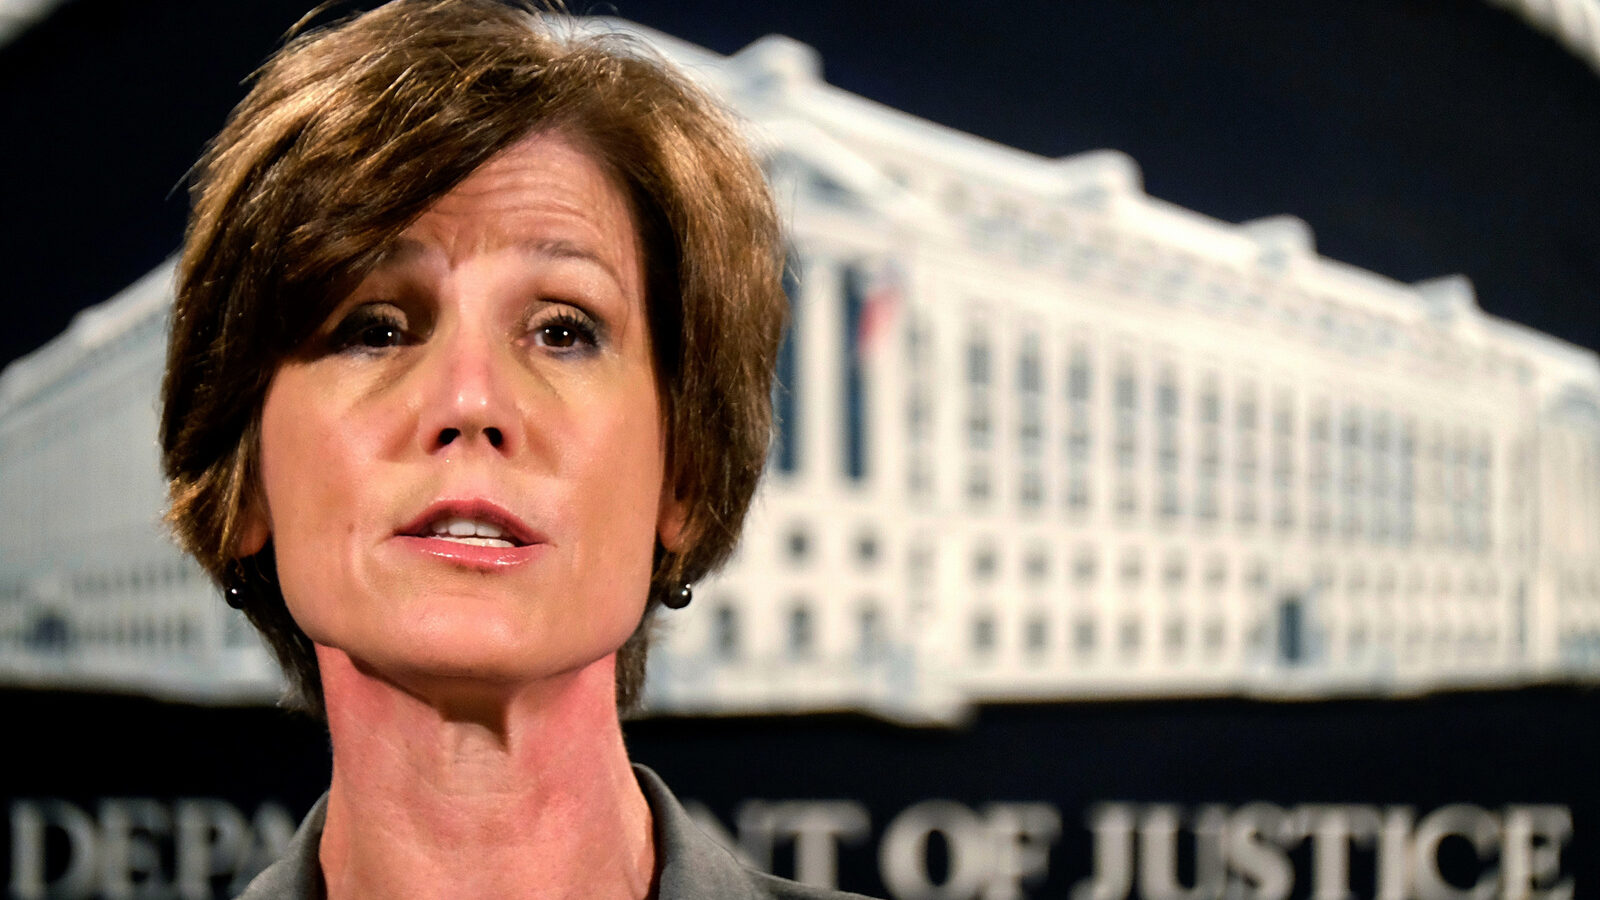 Deputy Attorney General Sally Yates speaks during a news conference at the Justice Department in Washington. The Justice Department says it’s phasing out its relationships with private prisons after a recent audit found the private facilities have more safety and security problems than ones run by the government.